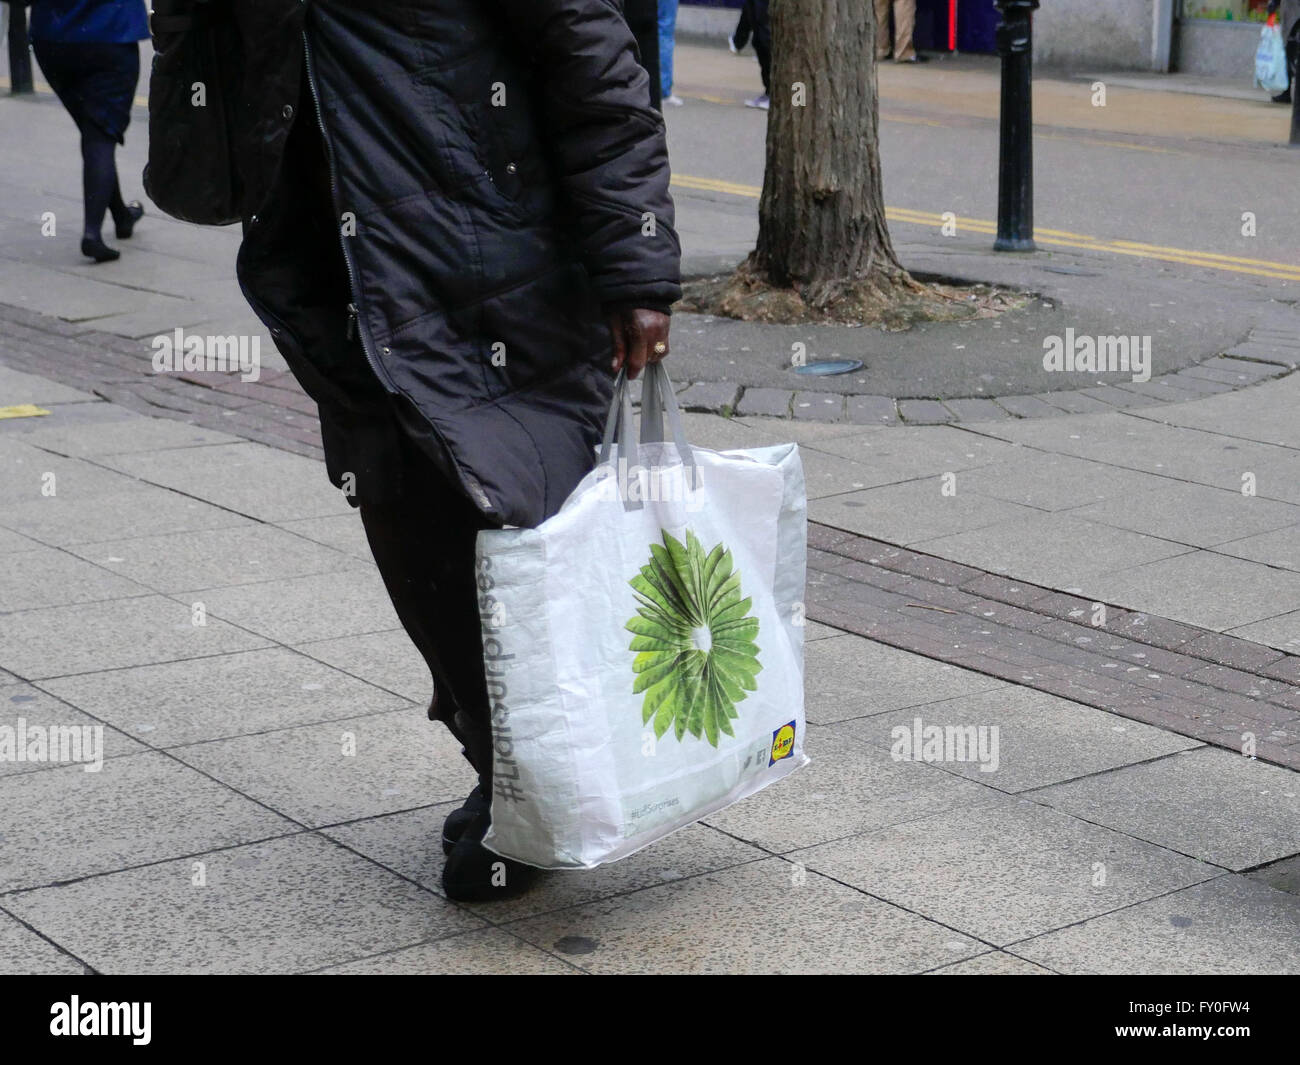 Lower body of a women carrying a Lidl shopping bag Stock Photo